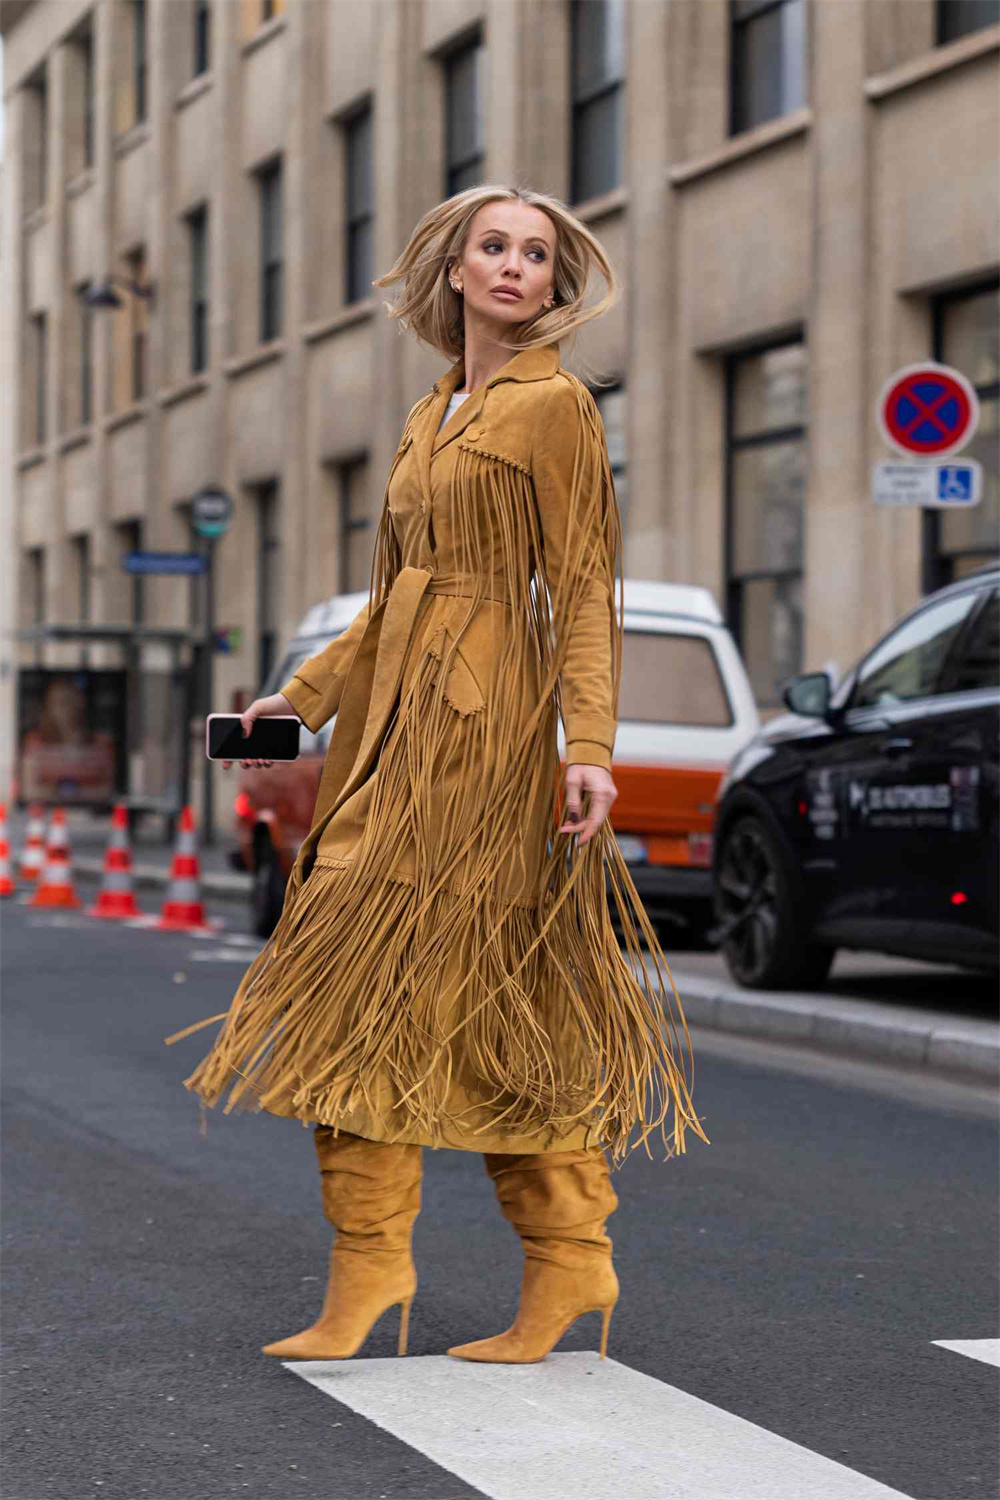 boho chic outfit with fringe and tassels